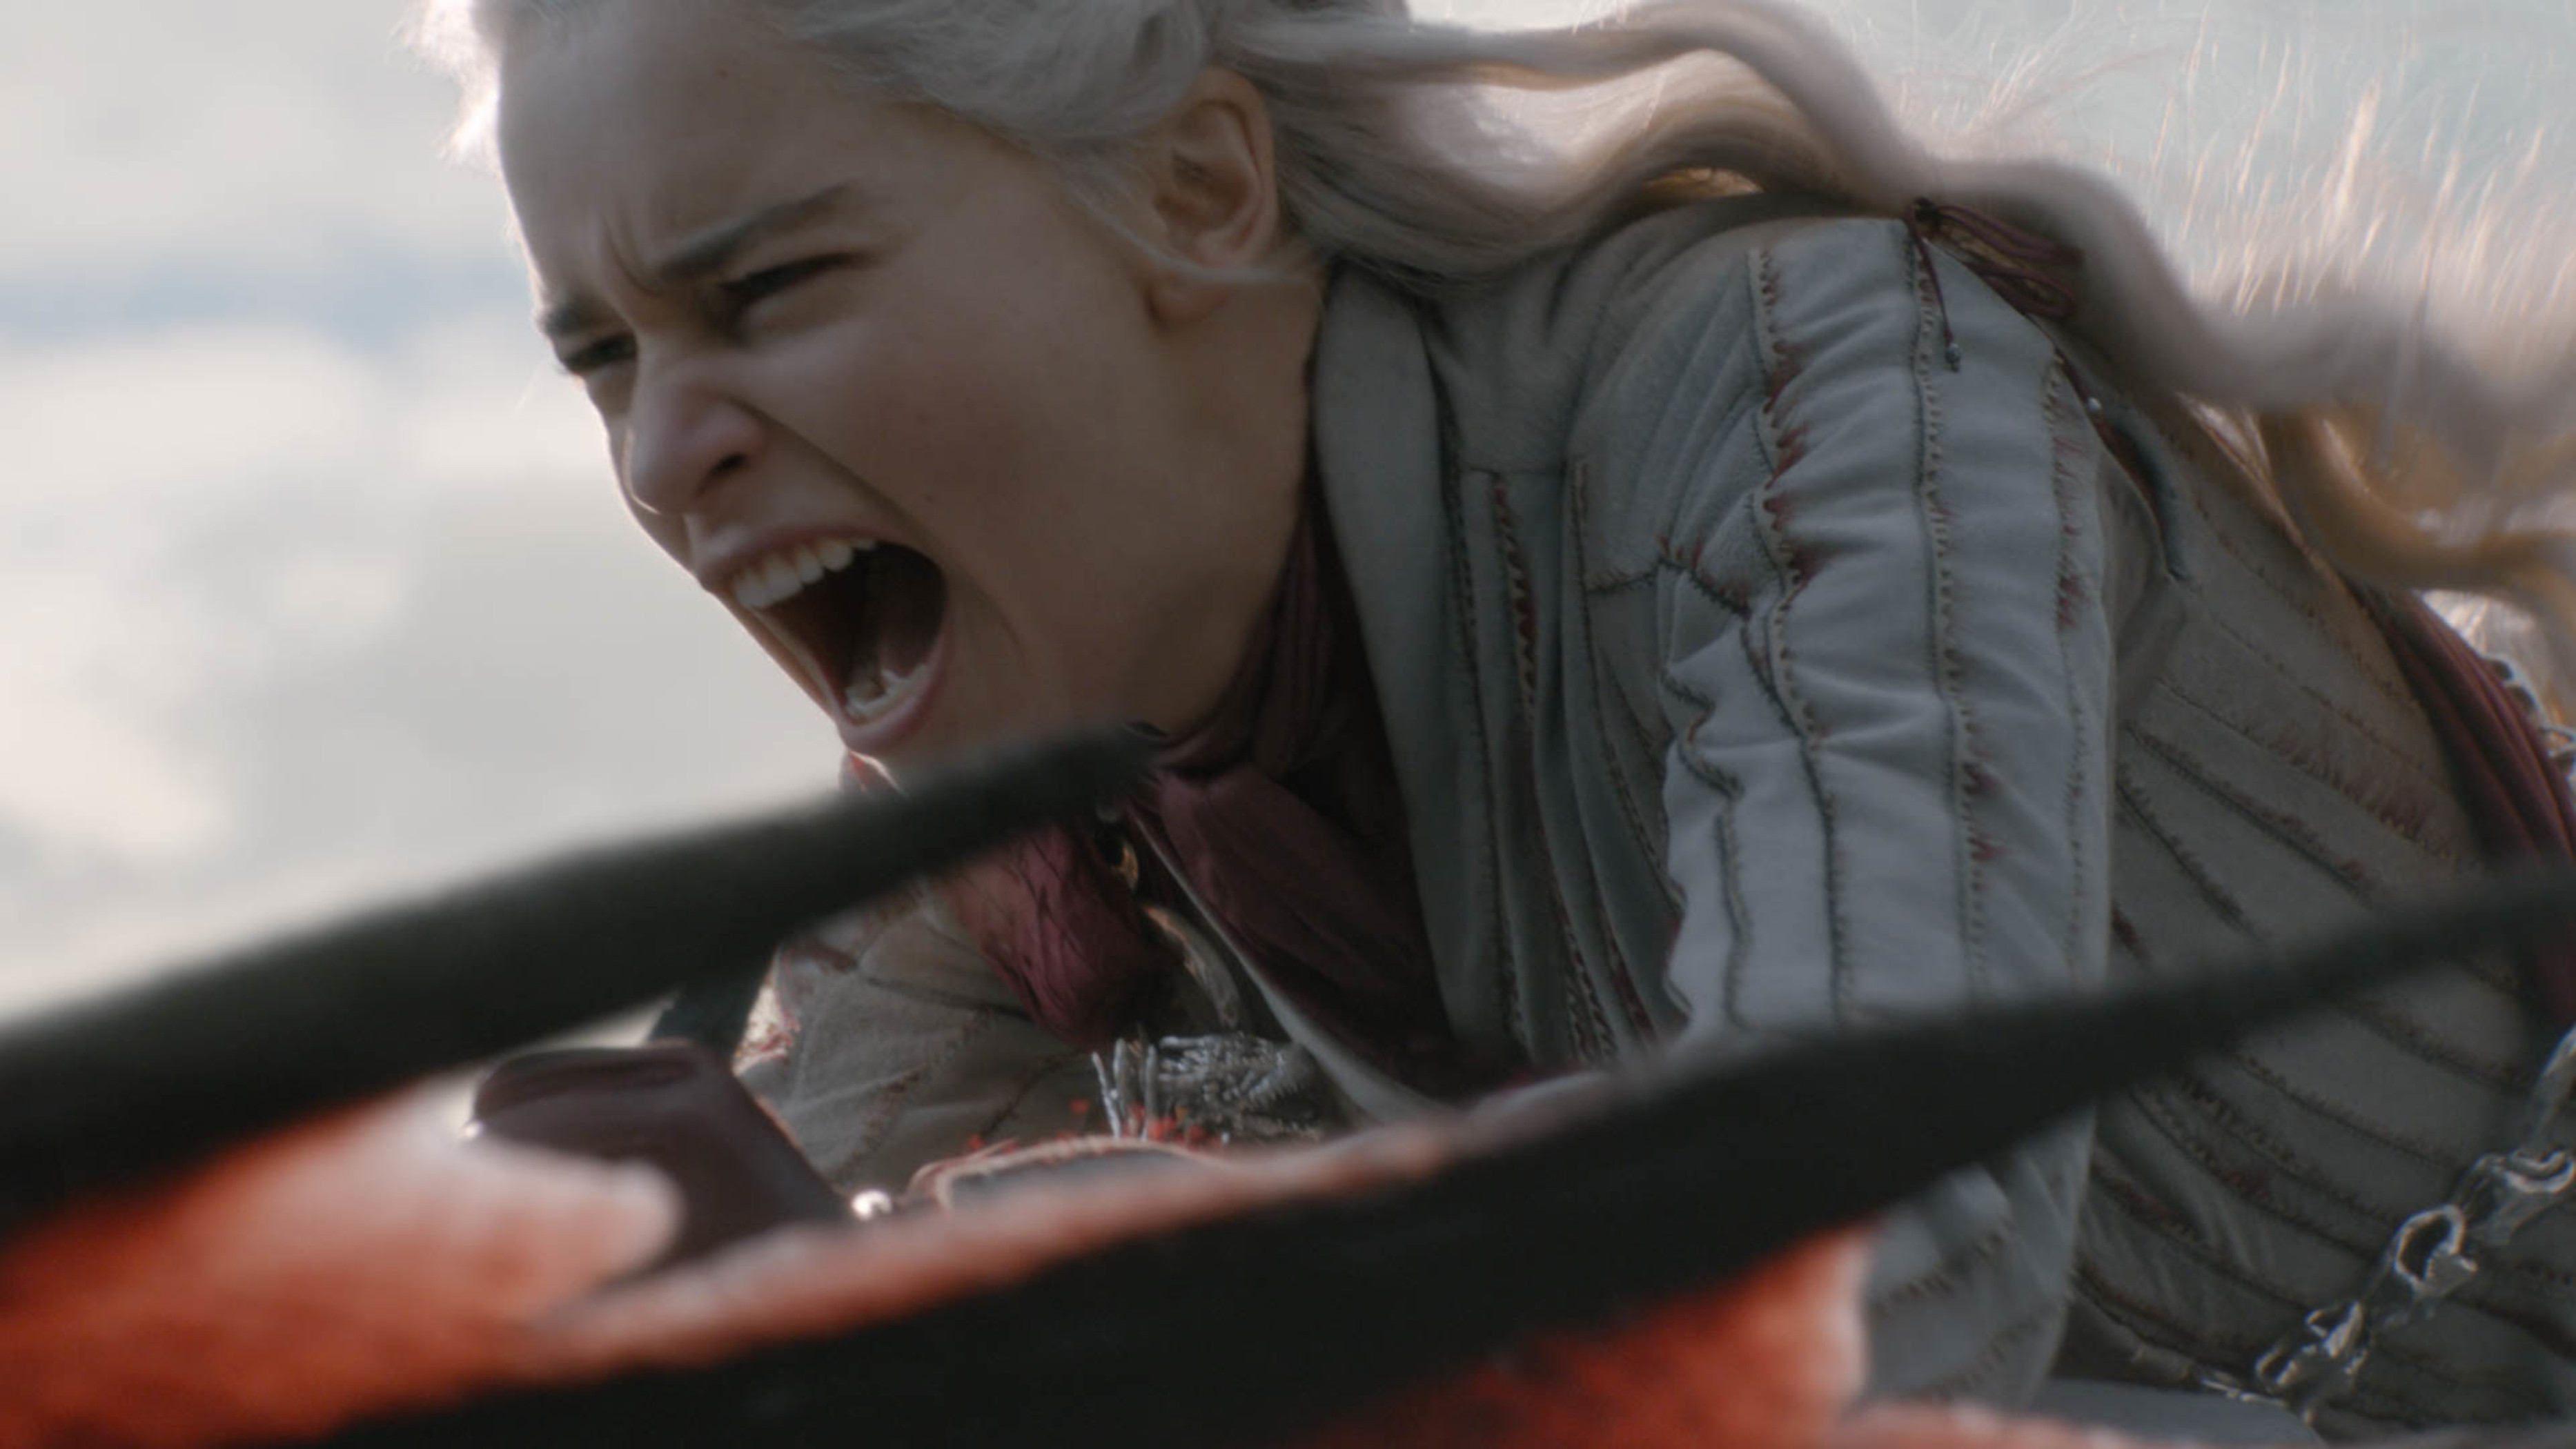 Which Game Of Thrones Character Are You? Daenerys GoT